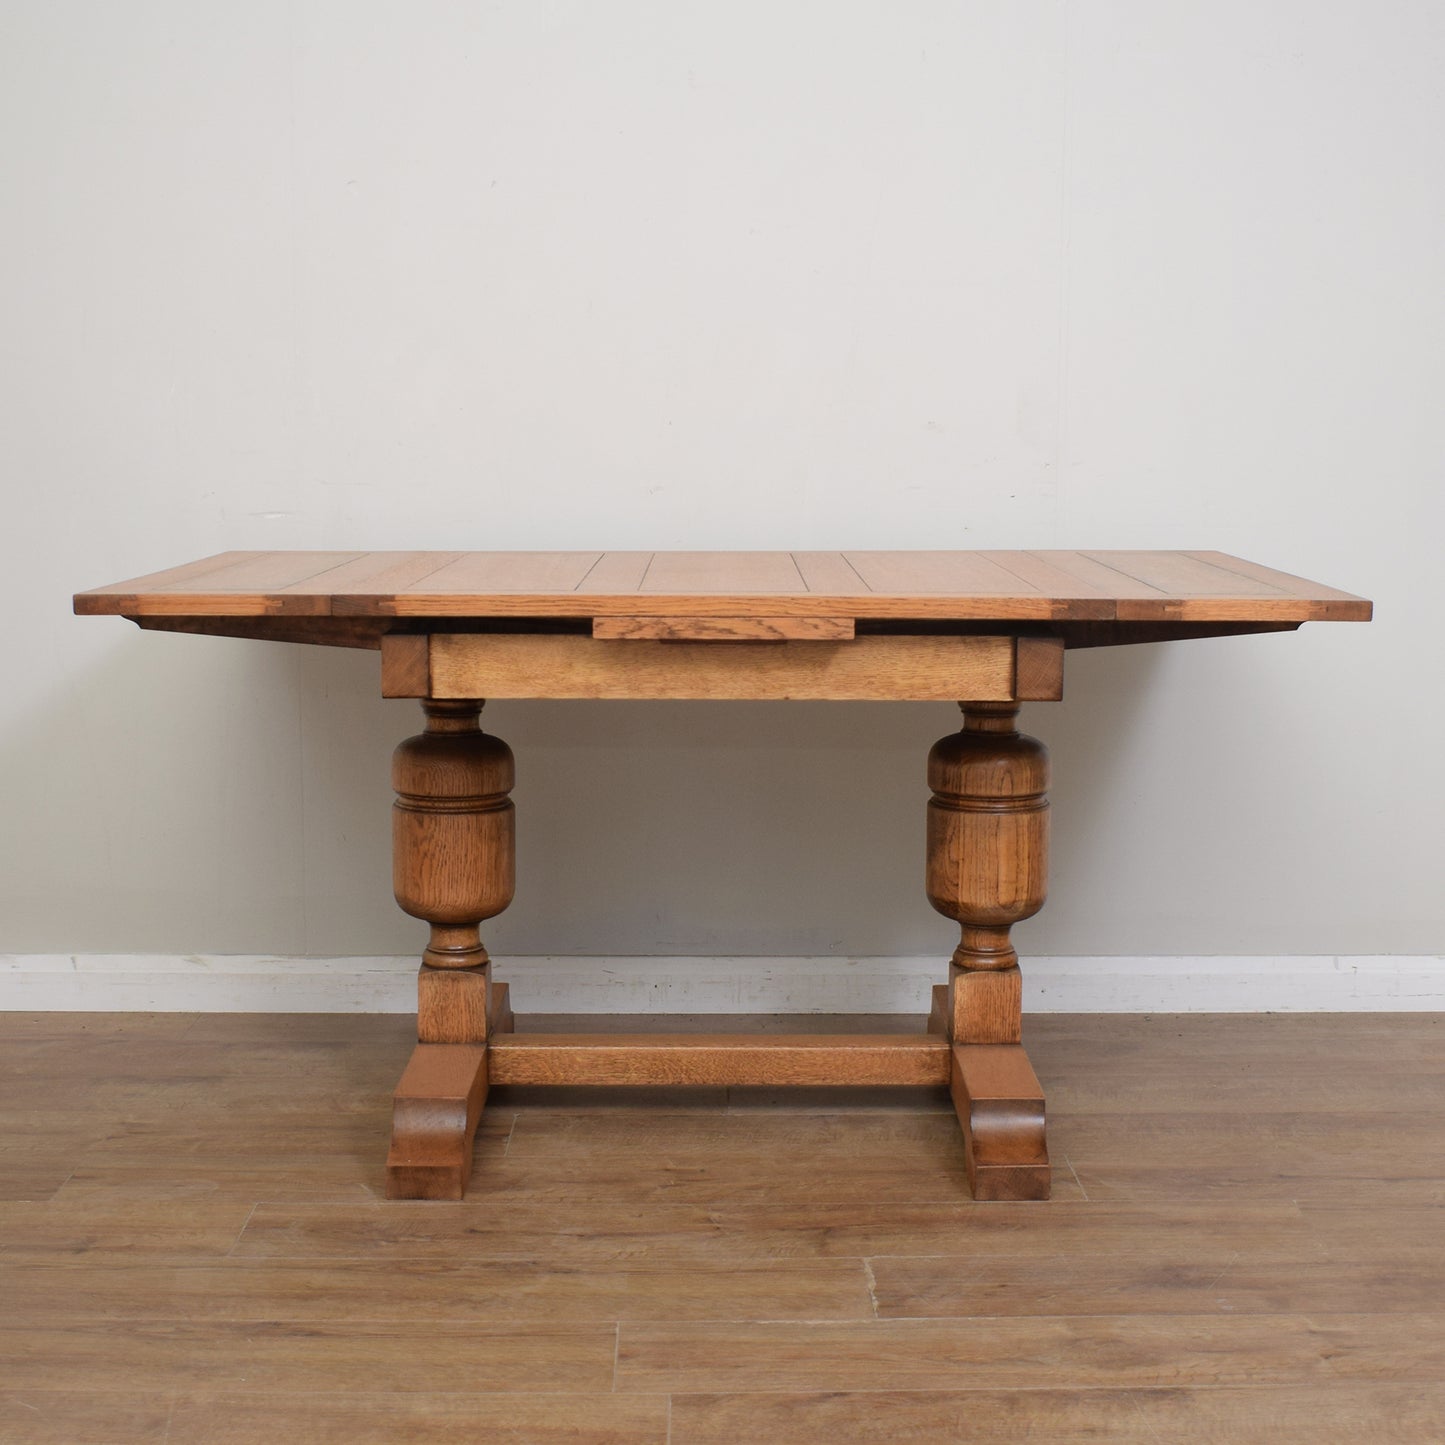 Vintage Oak Draw Leaf Table And Four Chairs